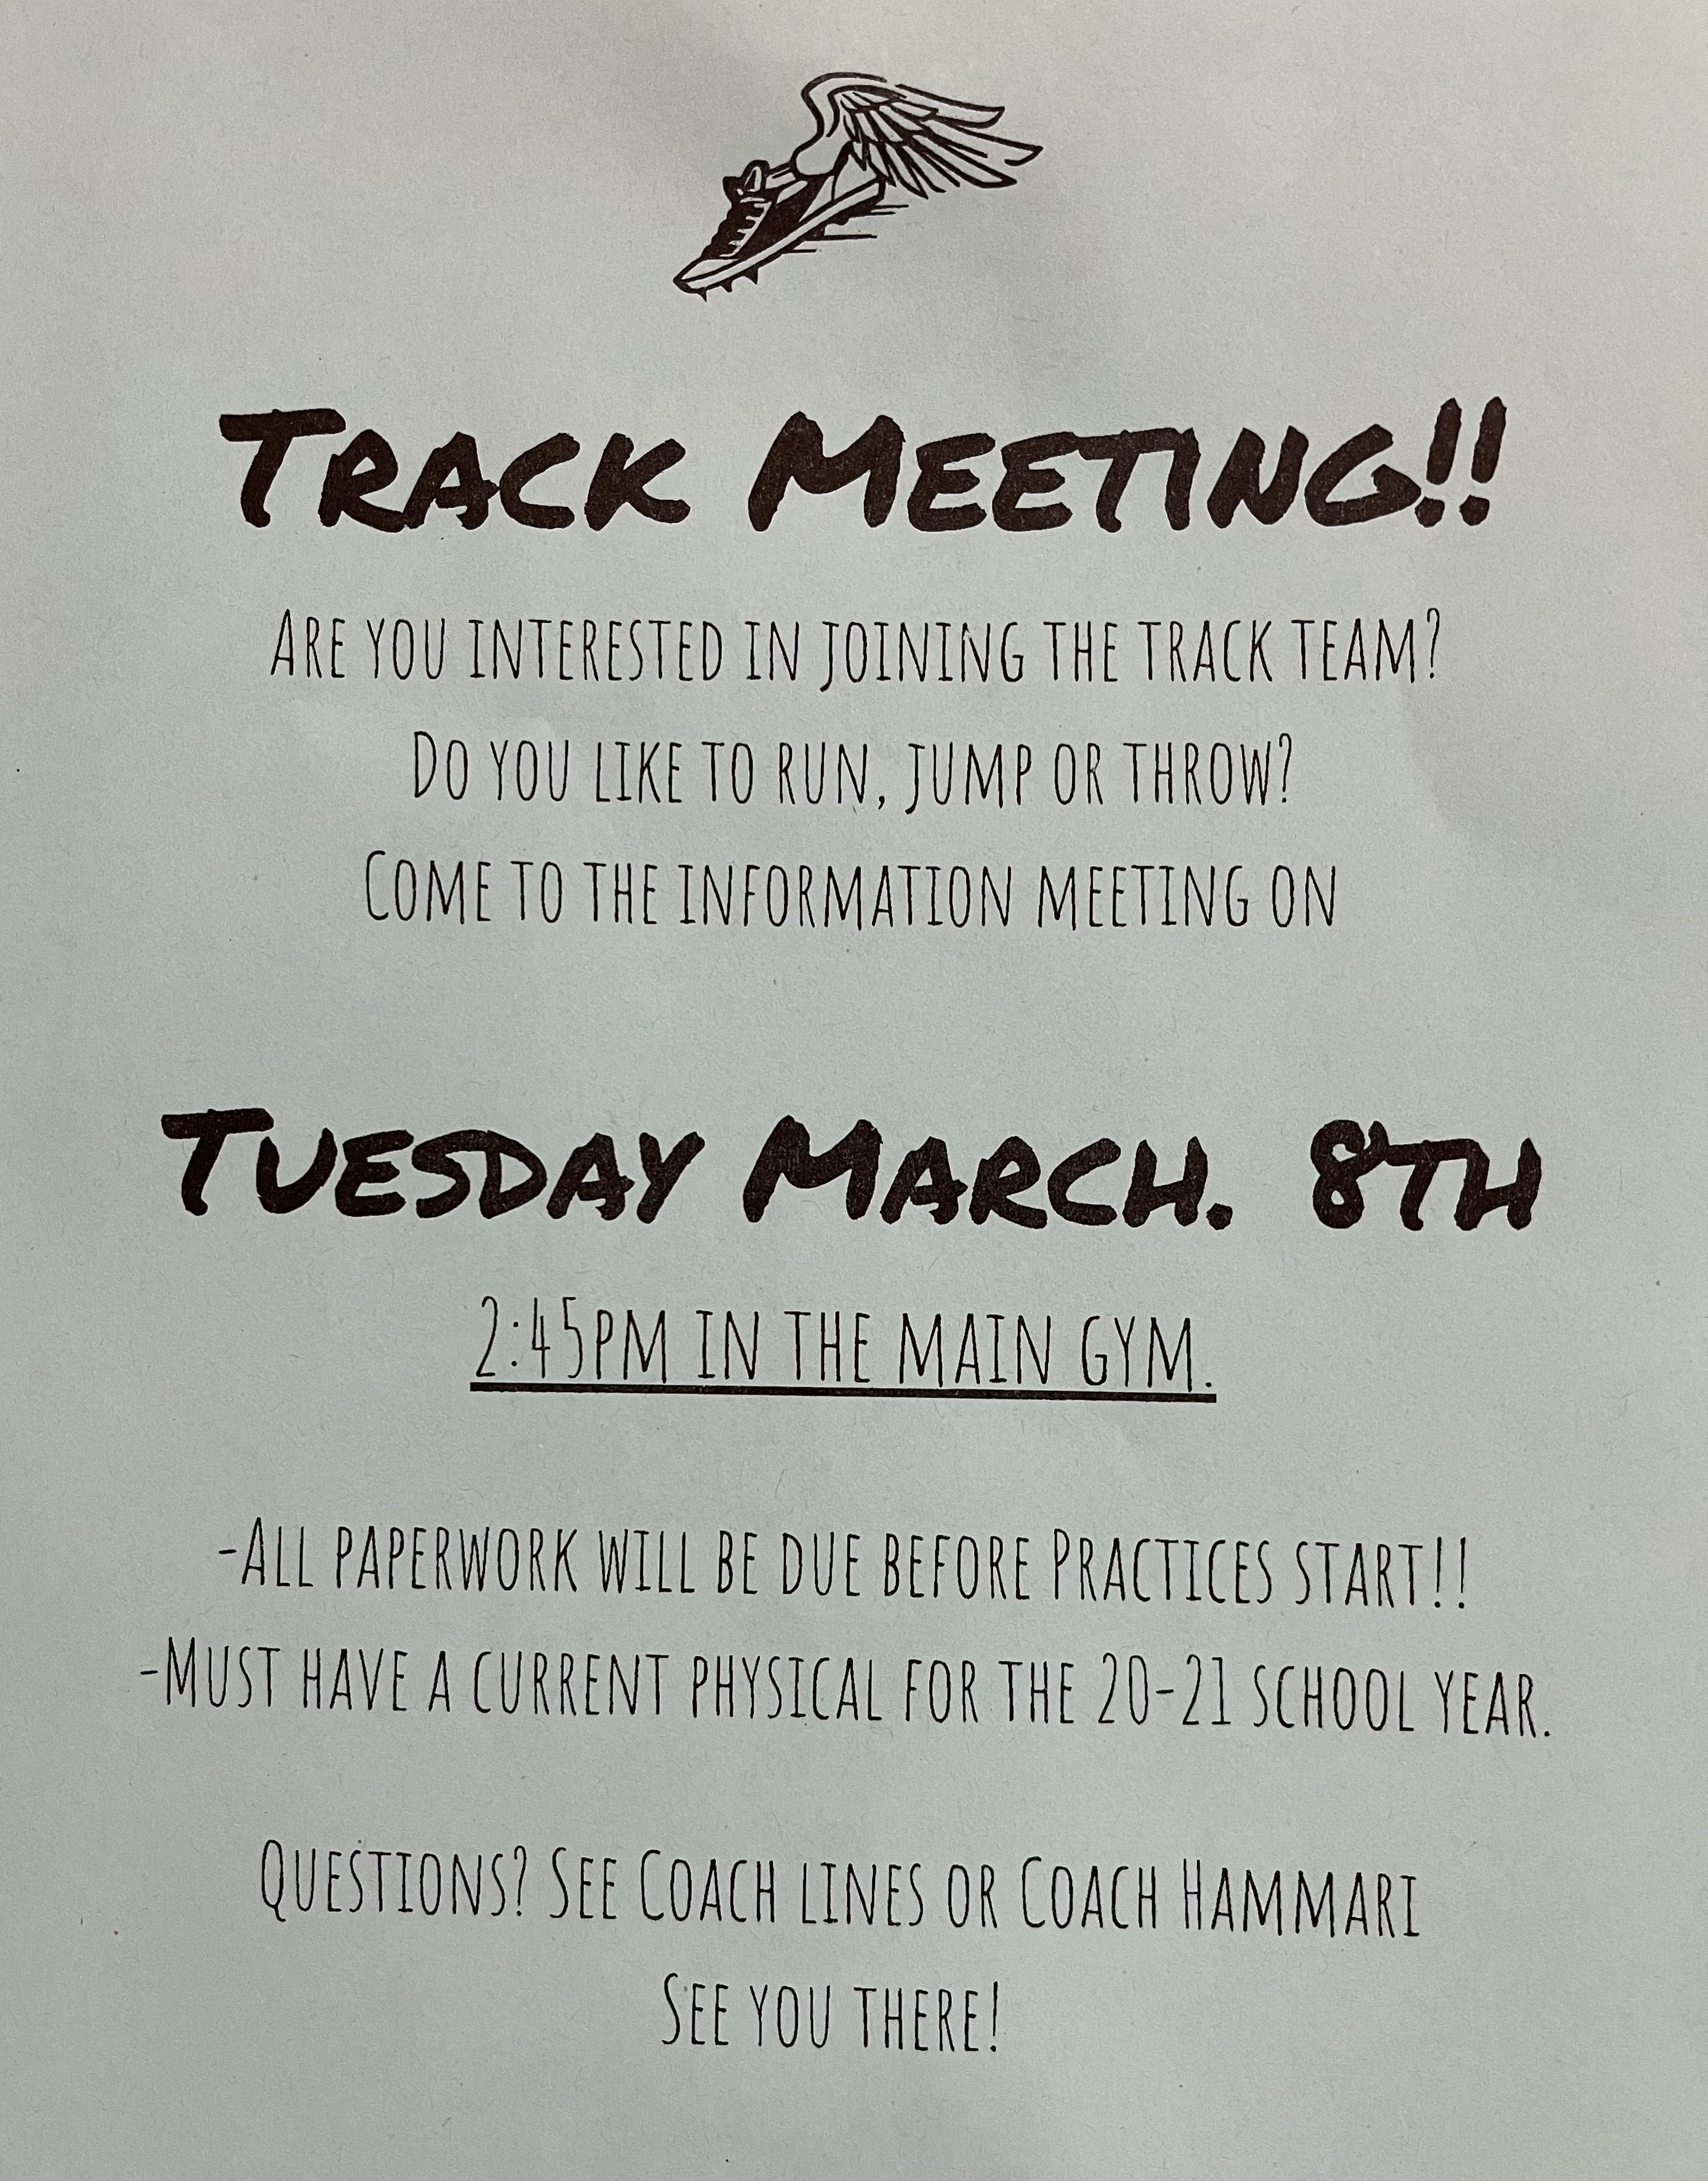 Track Meeting!